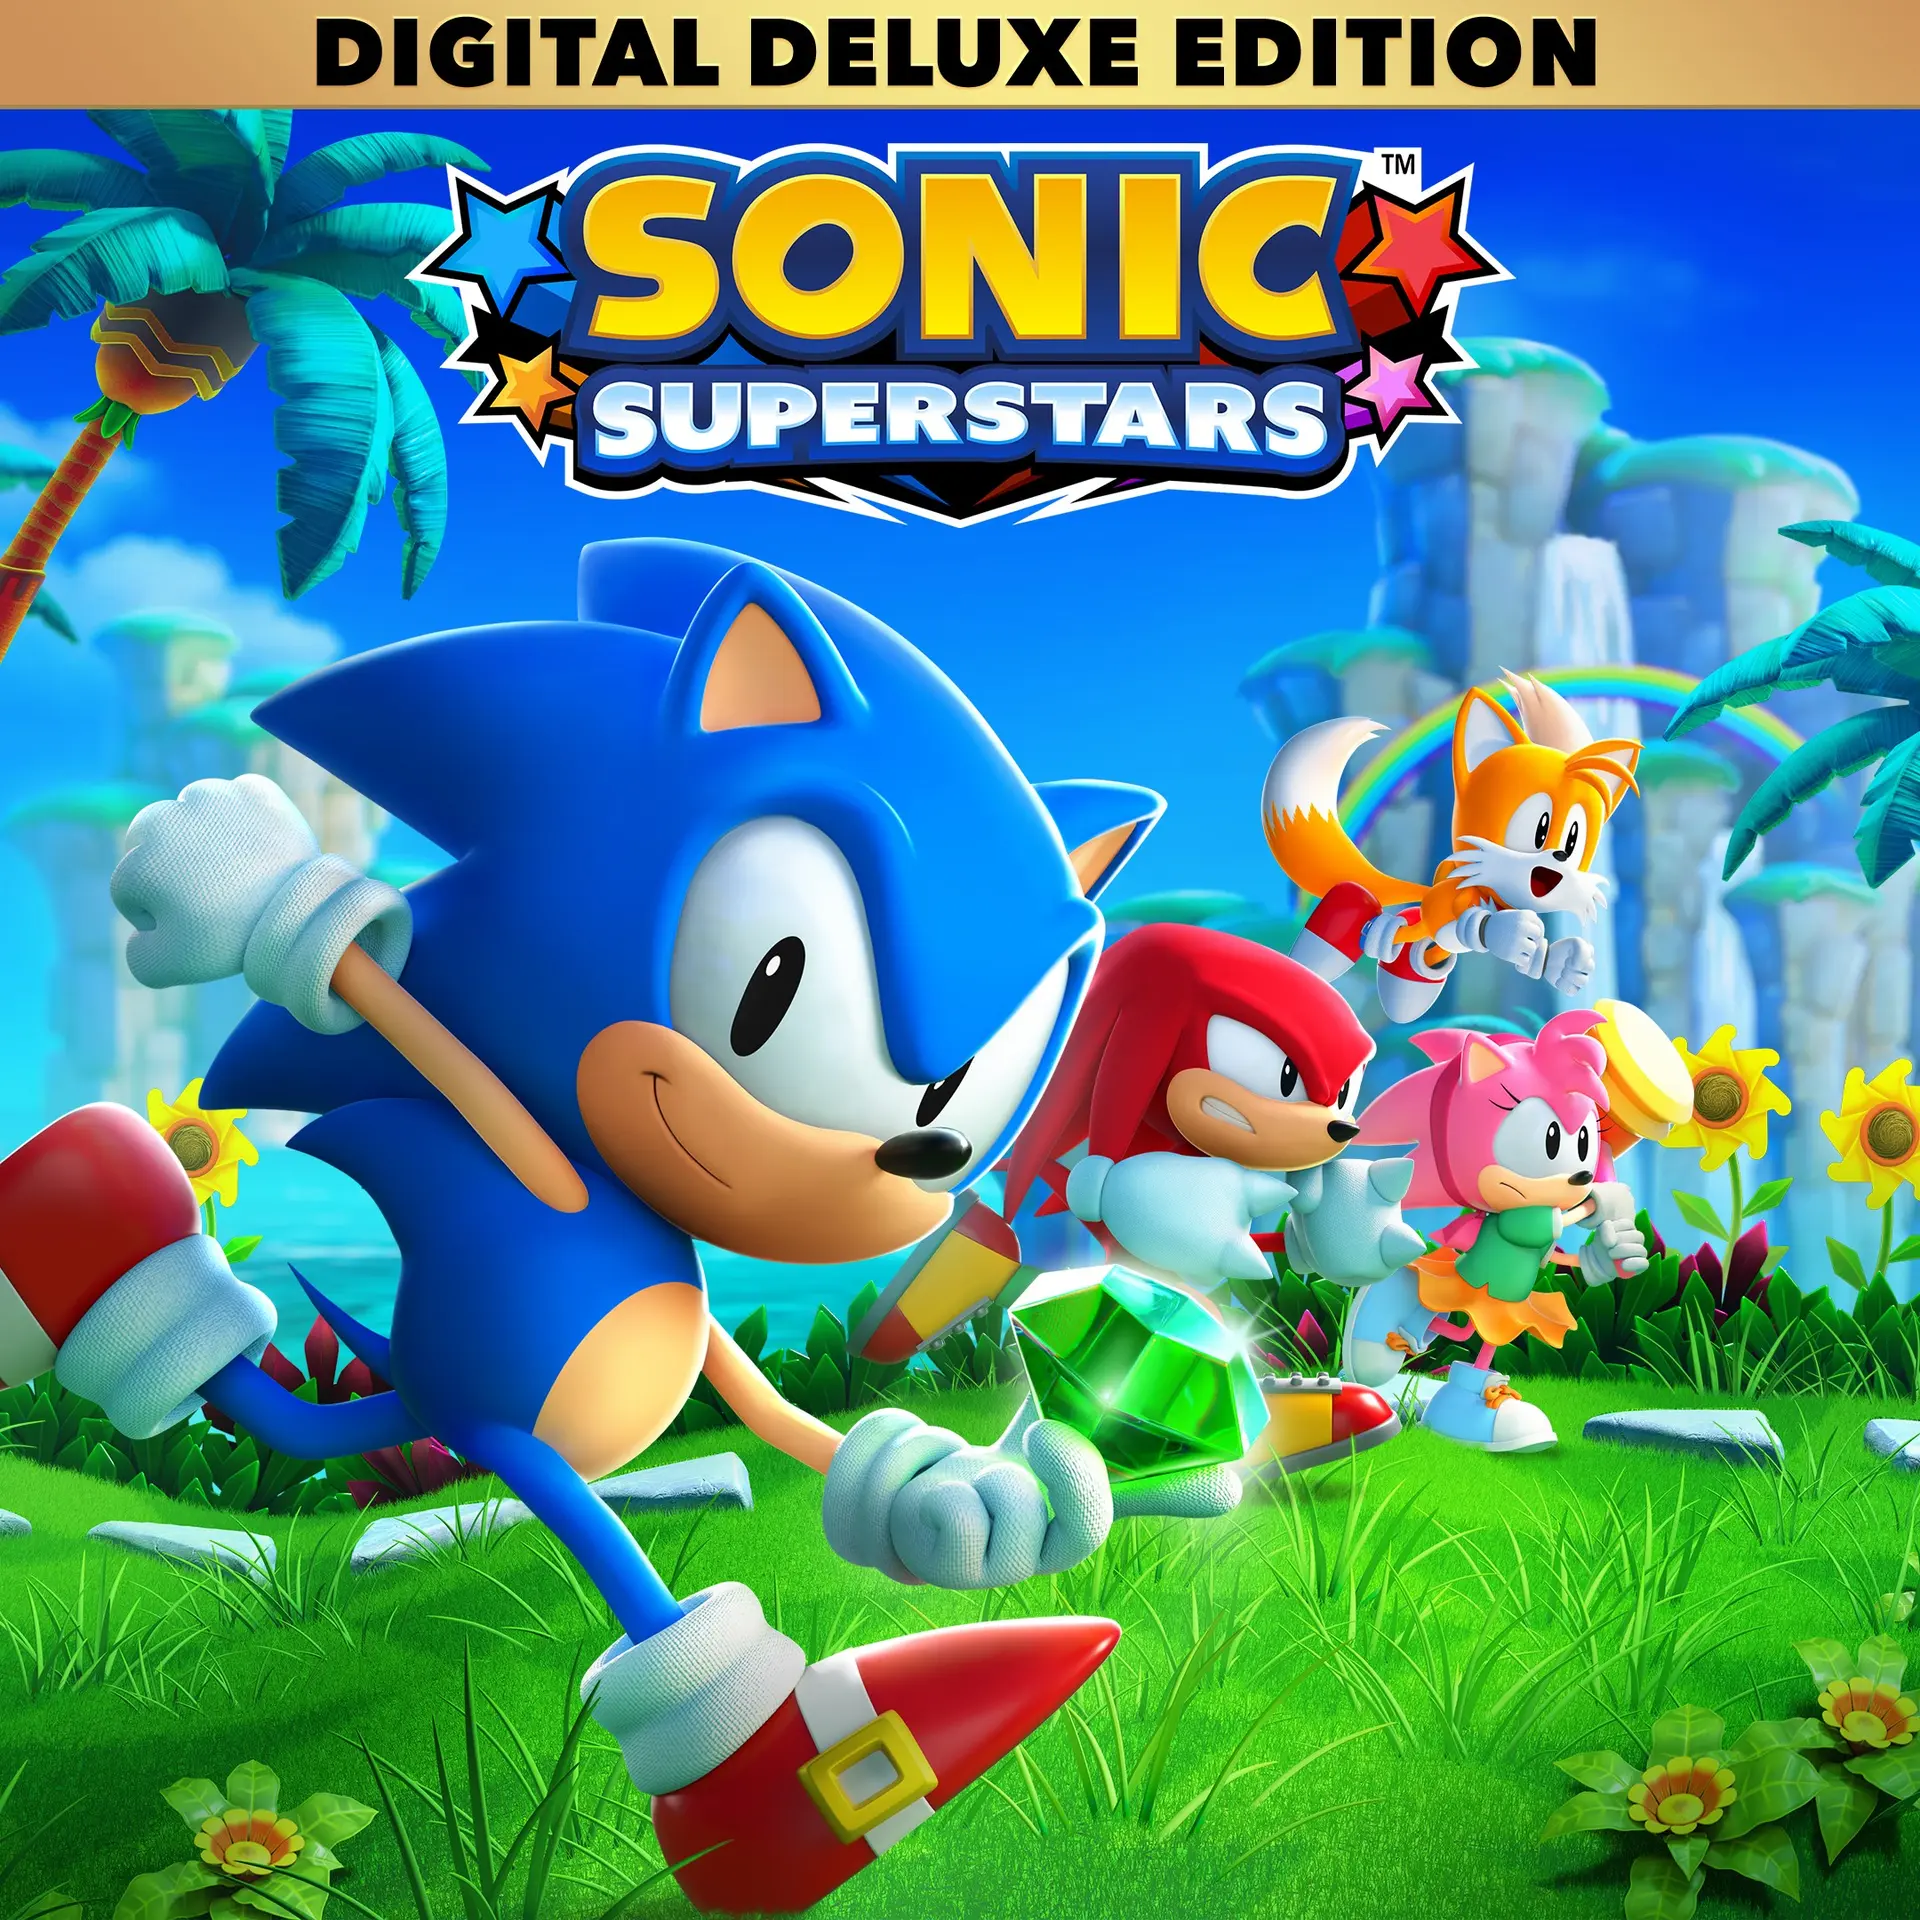 SONIC SUPERSTARS Digital Deluxe Edition featuring LEGO (Xbox Games US)